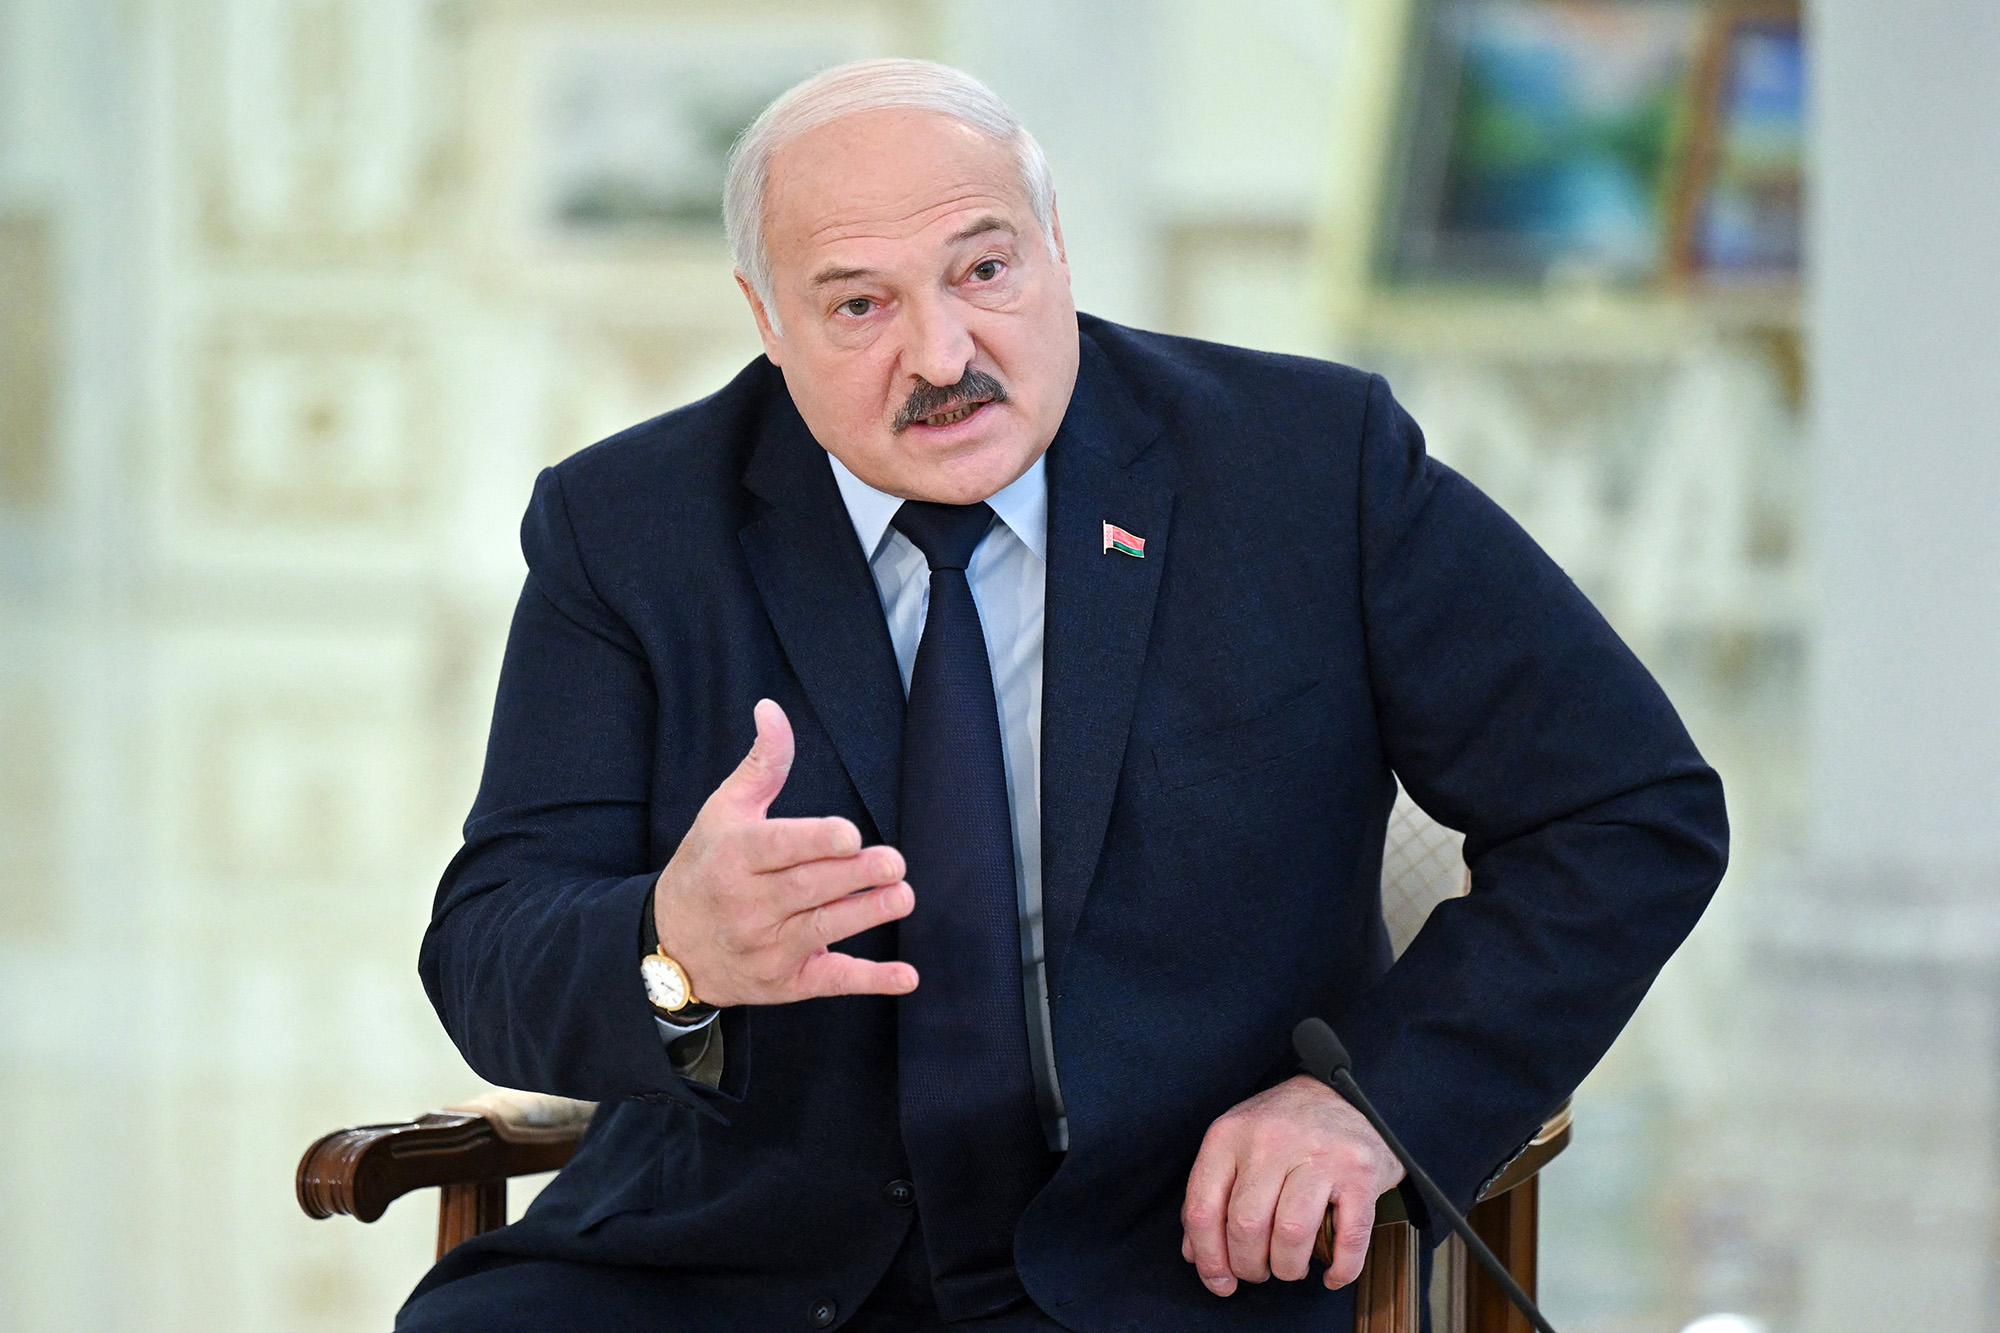 Belarus' President Alexander Lukashenko speaks as he meets with foreign media at the Independence Palace, in Minsk, Belarus, on February 16.